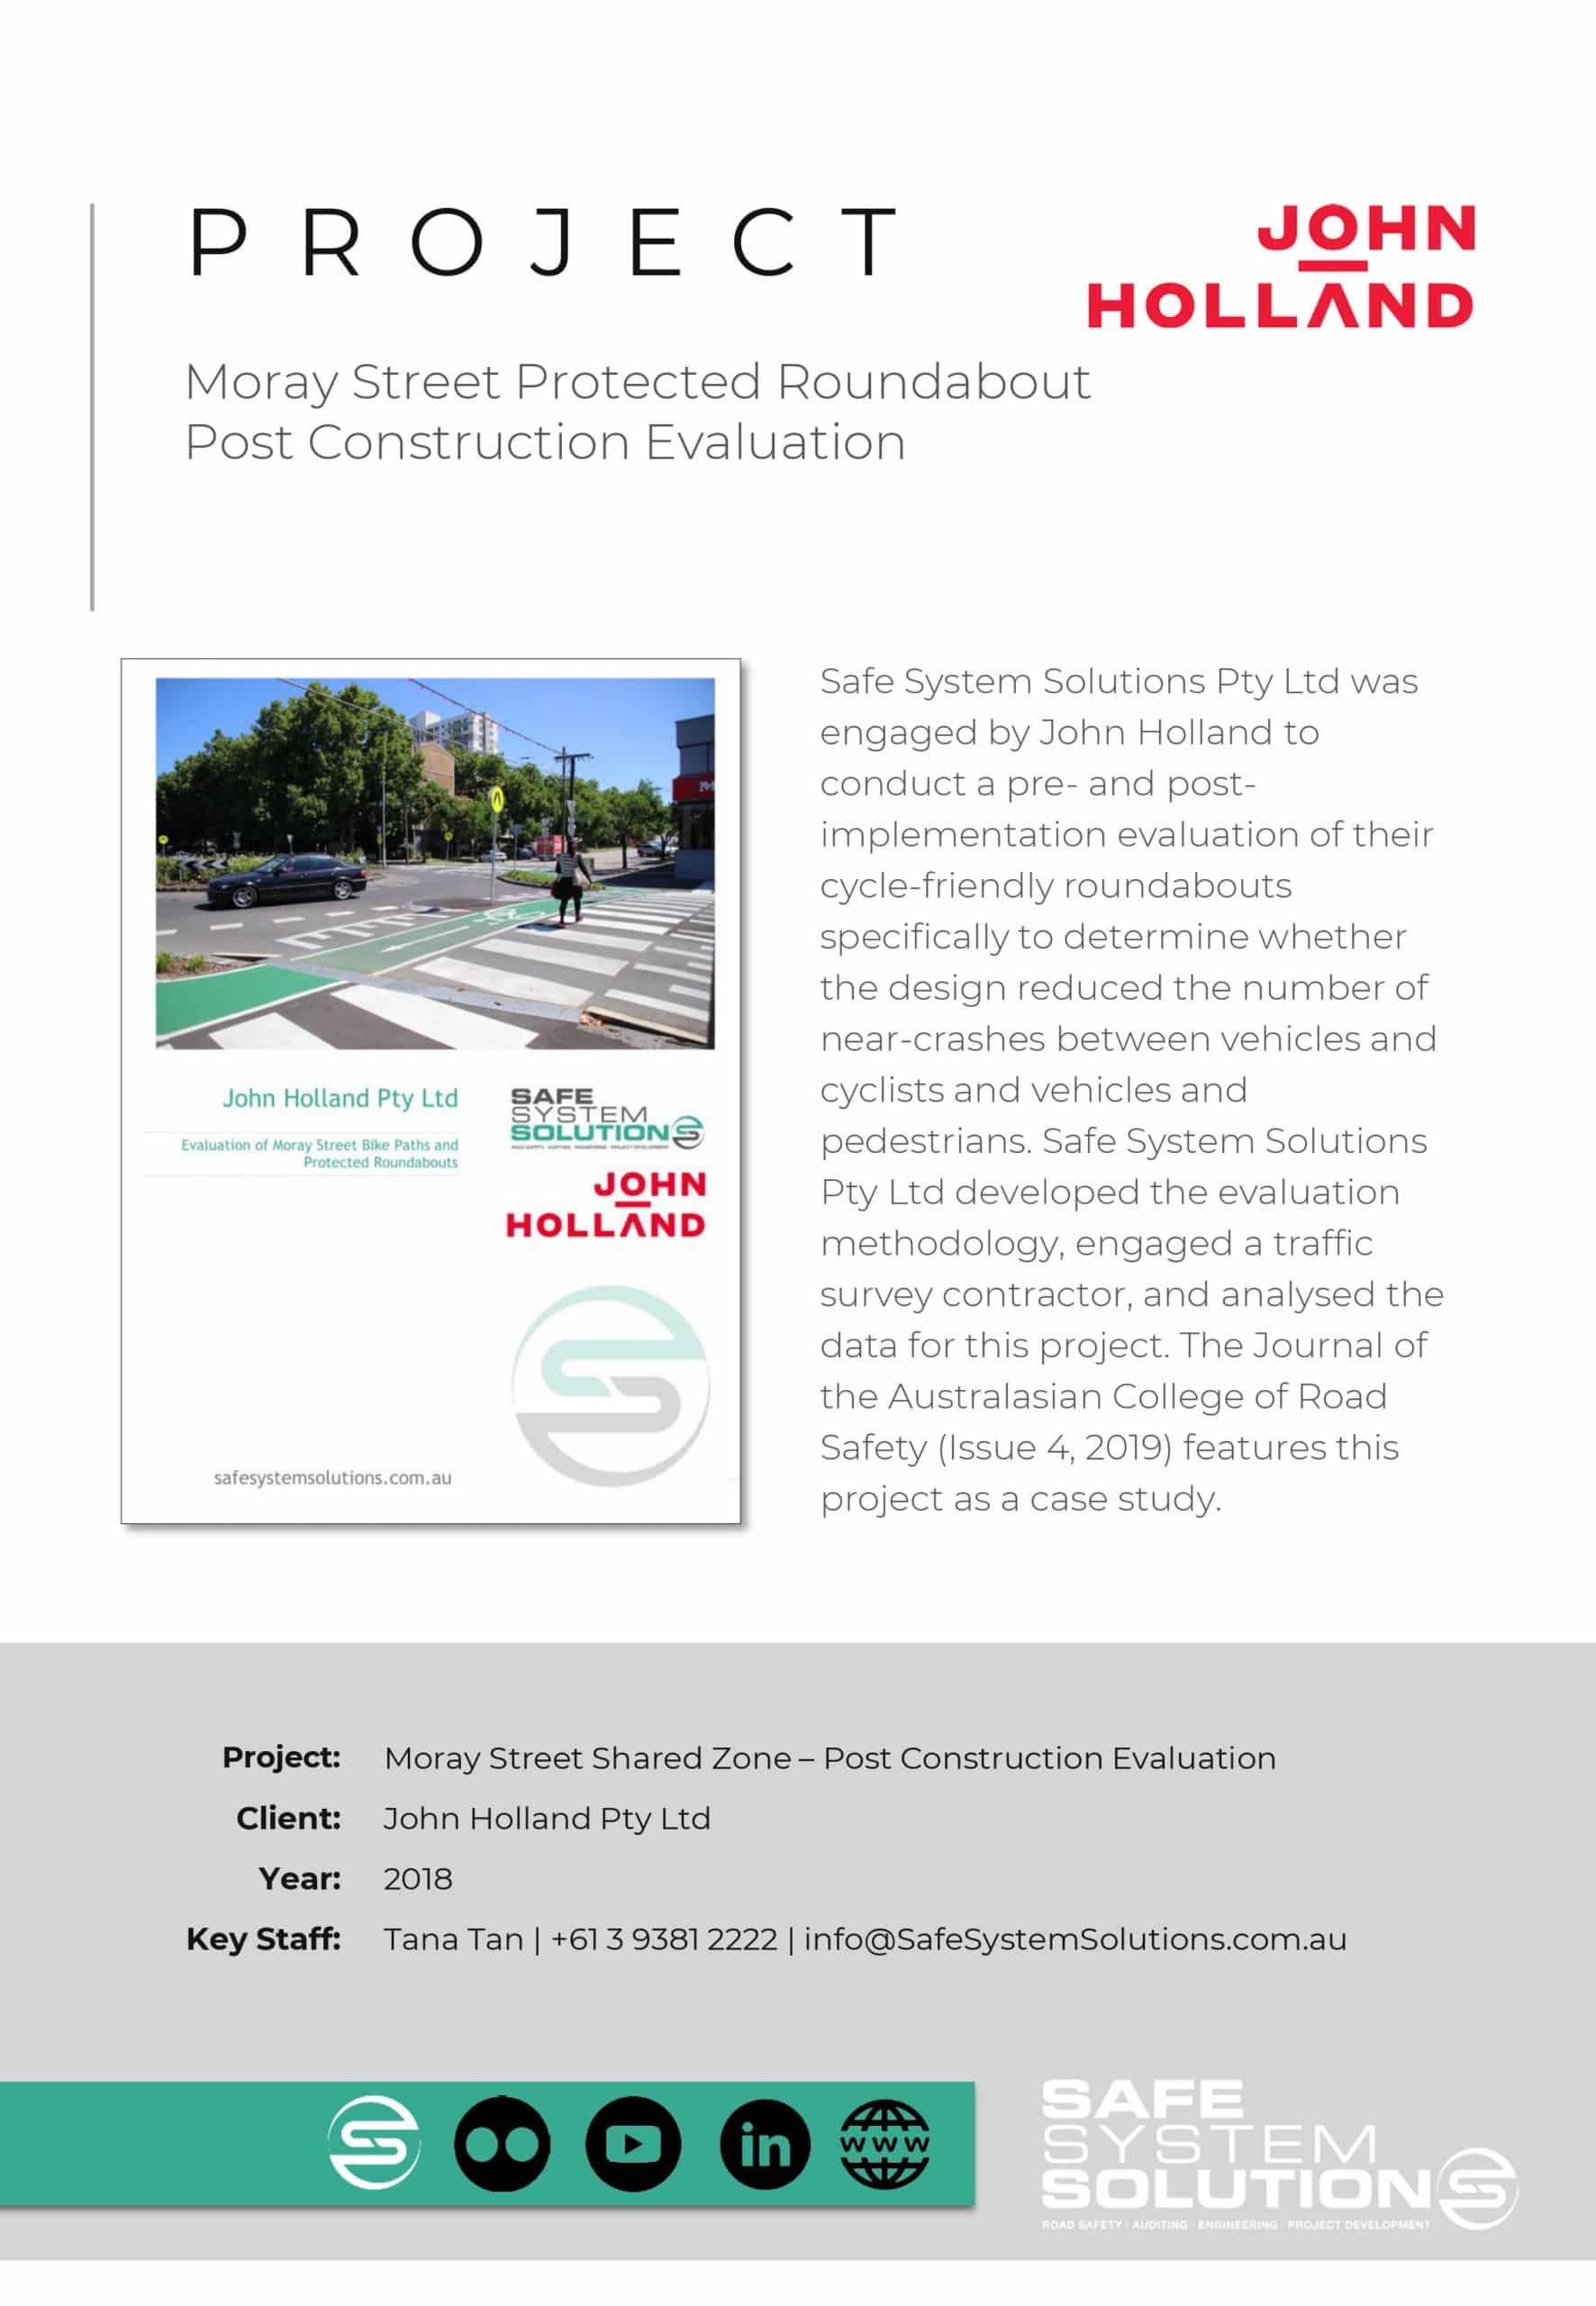 Moray Street Protected Roundabout Post Construction Evaluation